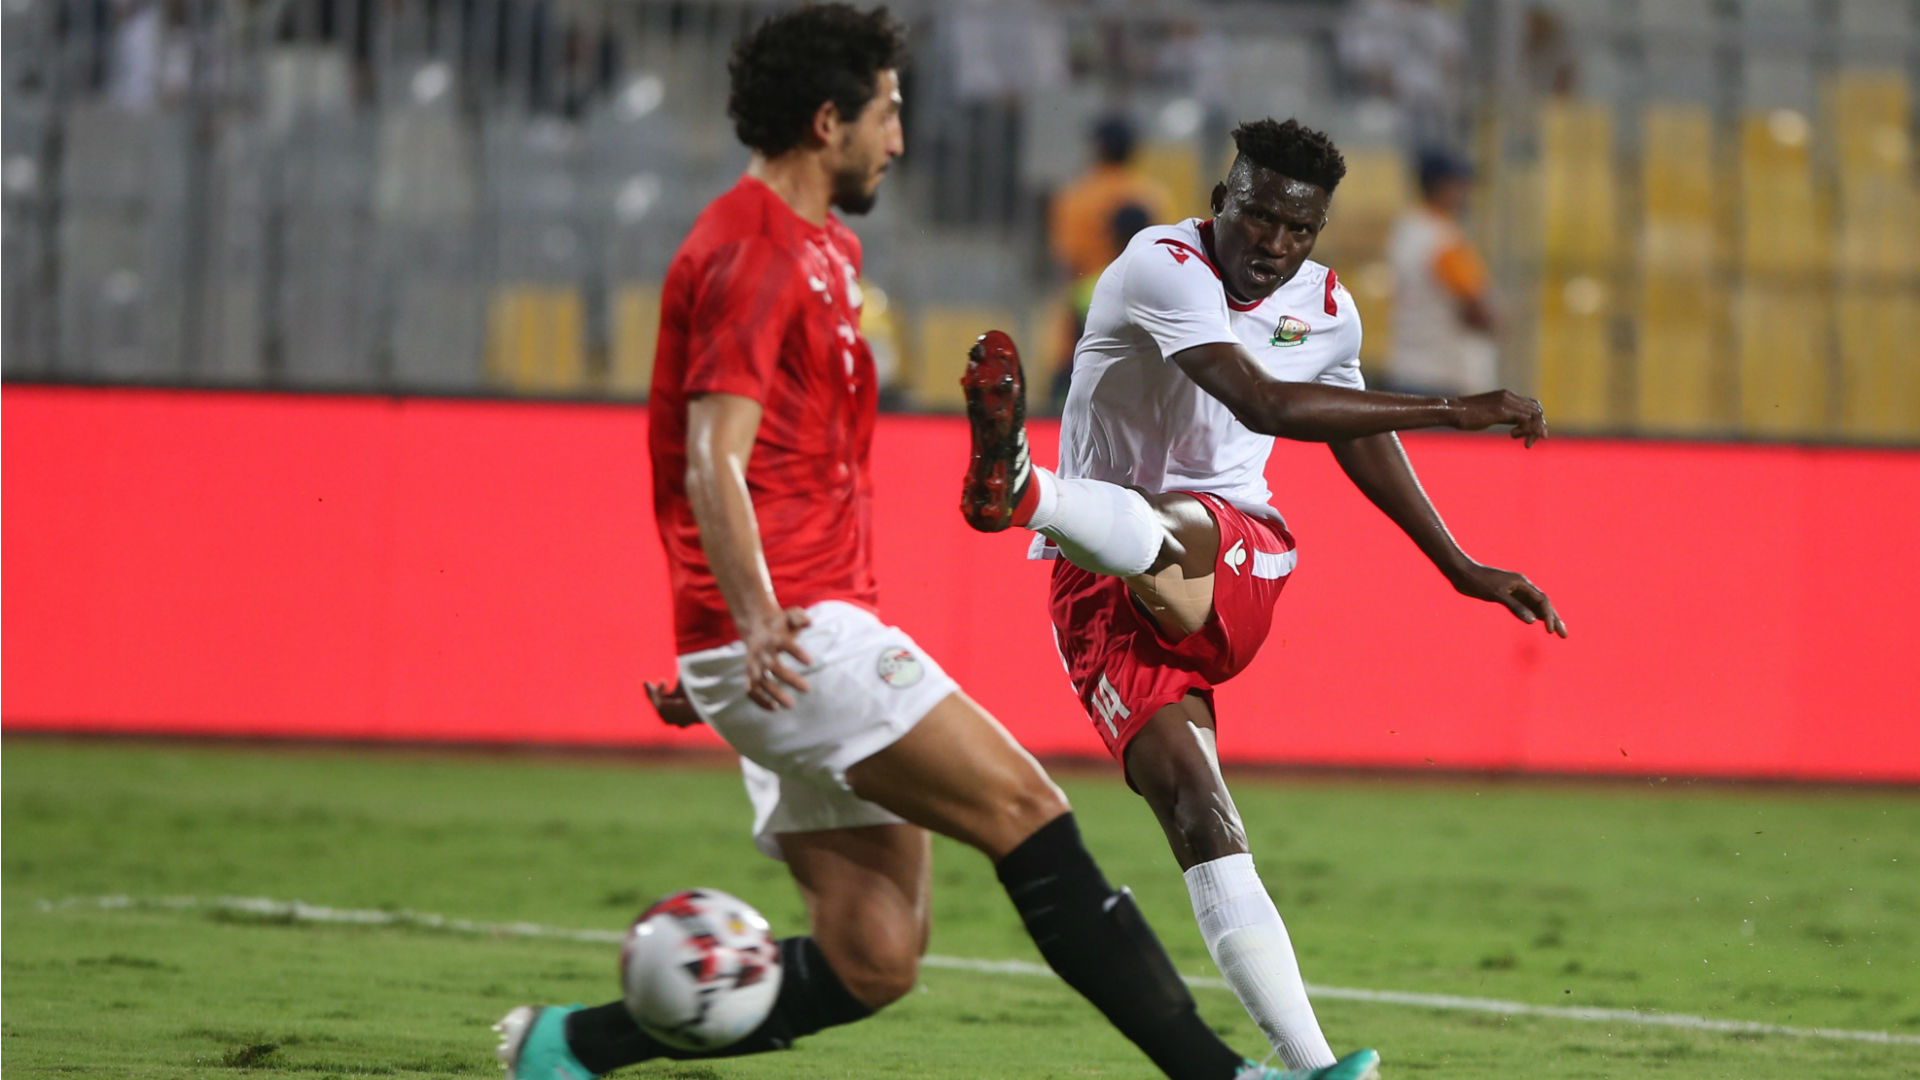 Olympic Games: Egypt's target is to reach second round in Tokyo - Hegazi